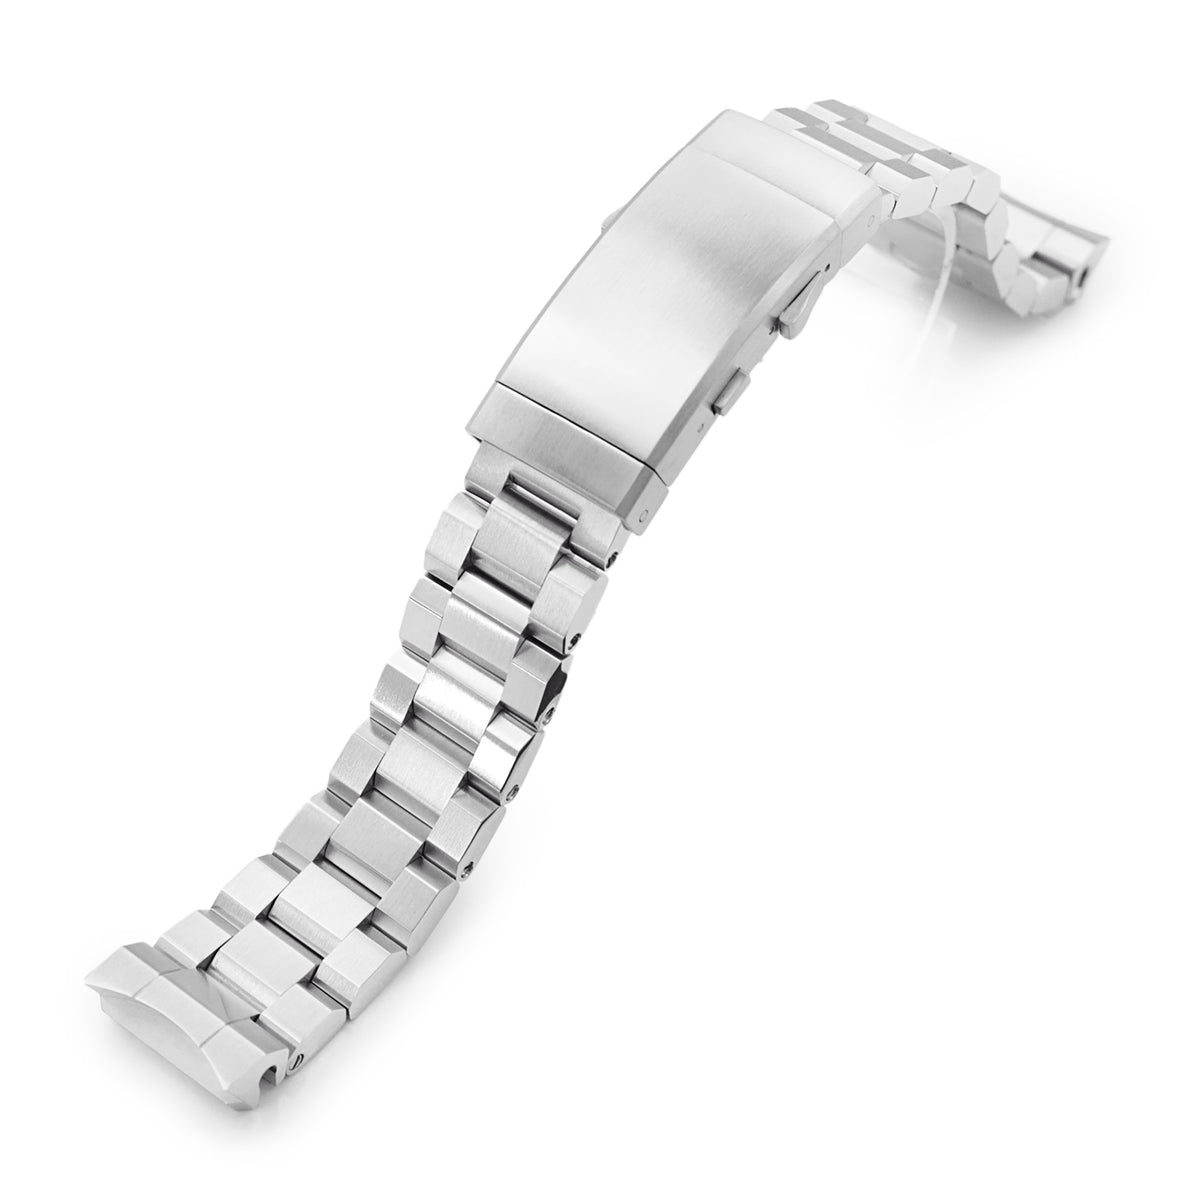 20mm Hexad Watch Band for Seiko MM300 Prospex Marinemaster SBDX001, 316L Stainless Steel Wetsuit Ratchet Buckle Strapcode Watch Bands